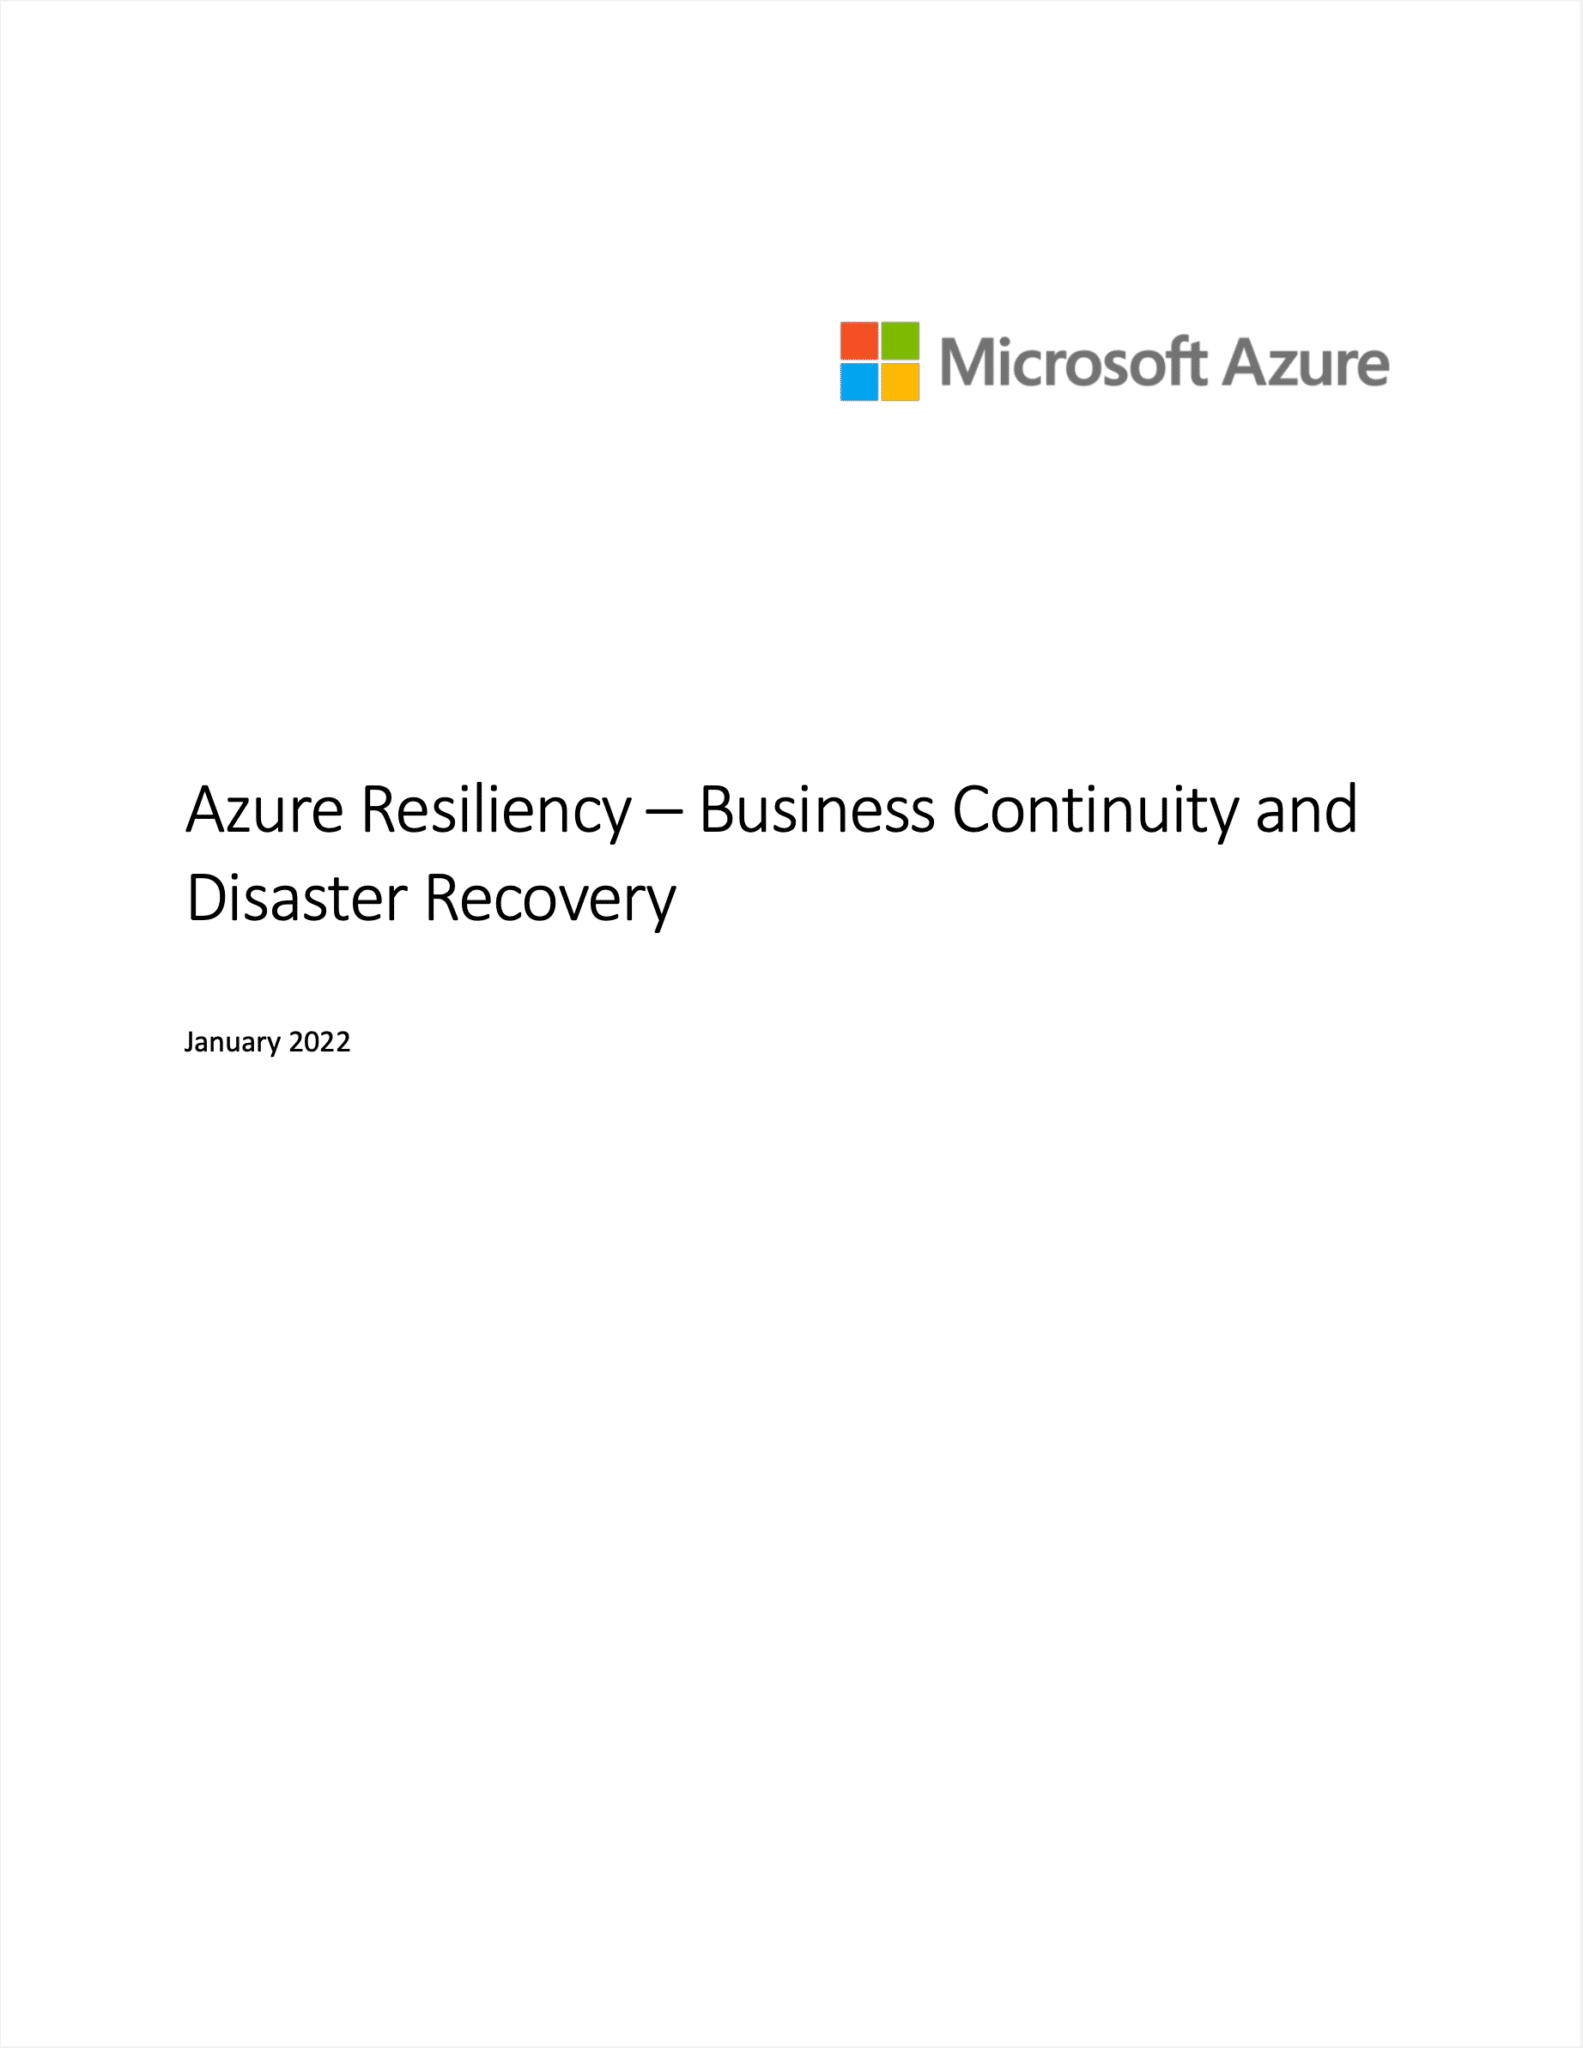 Azure Resiliency – Business Continuity and Disaster Recovery 4